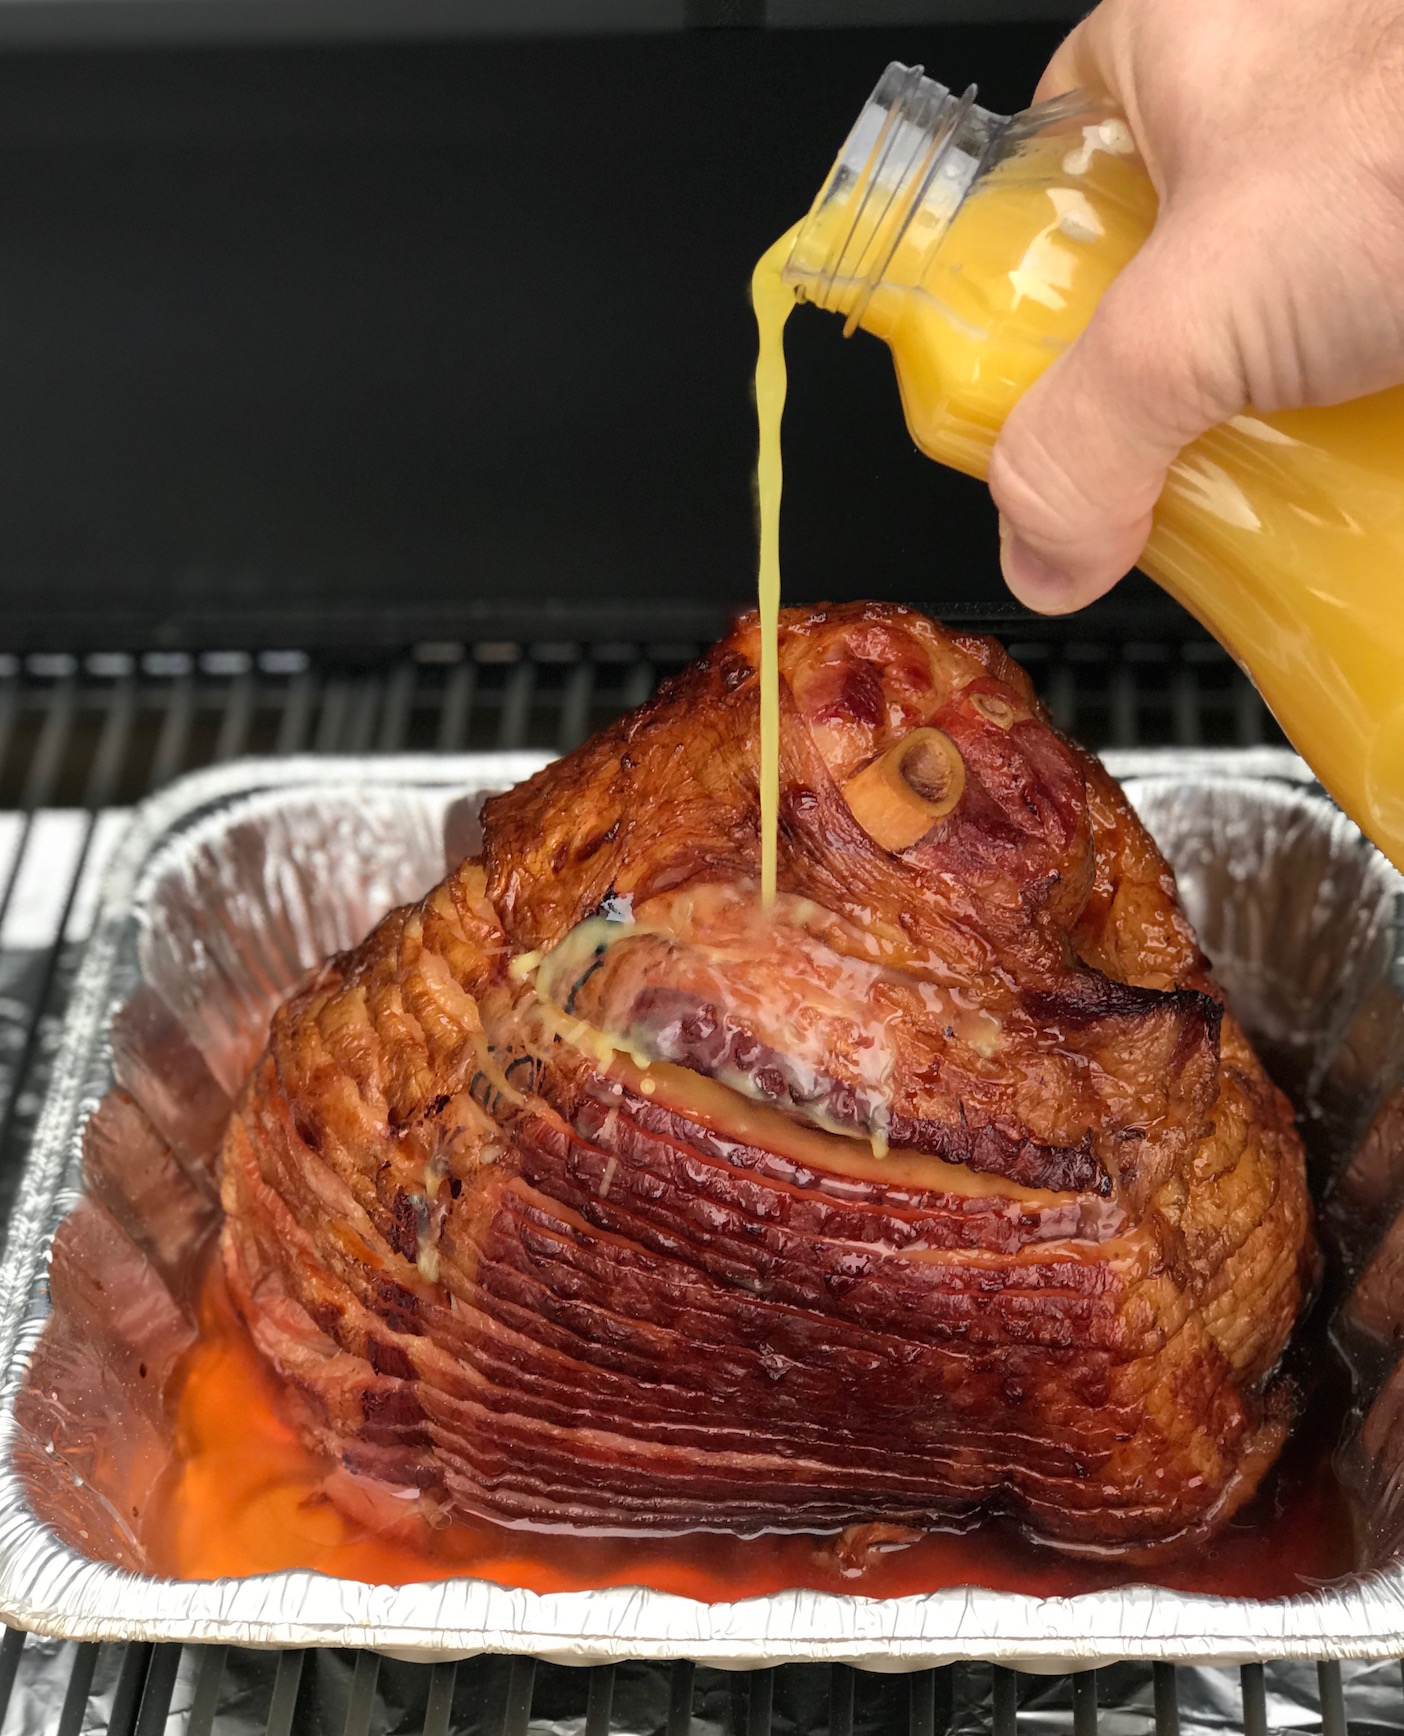 Smoked ham getting some orange juice poured on it during the cooking process.